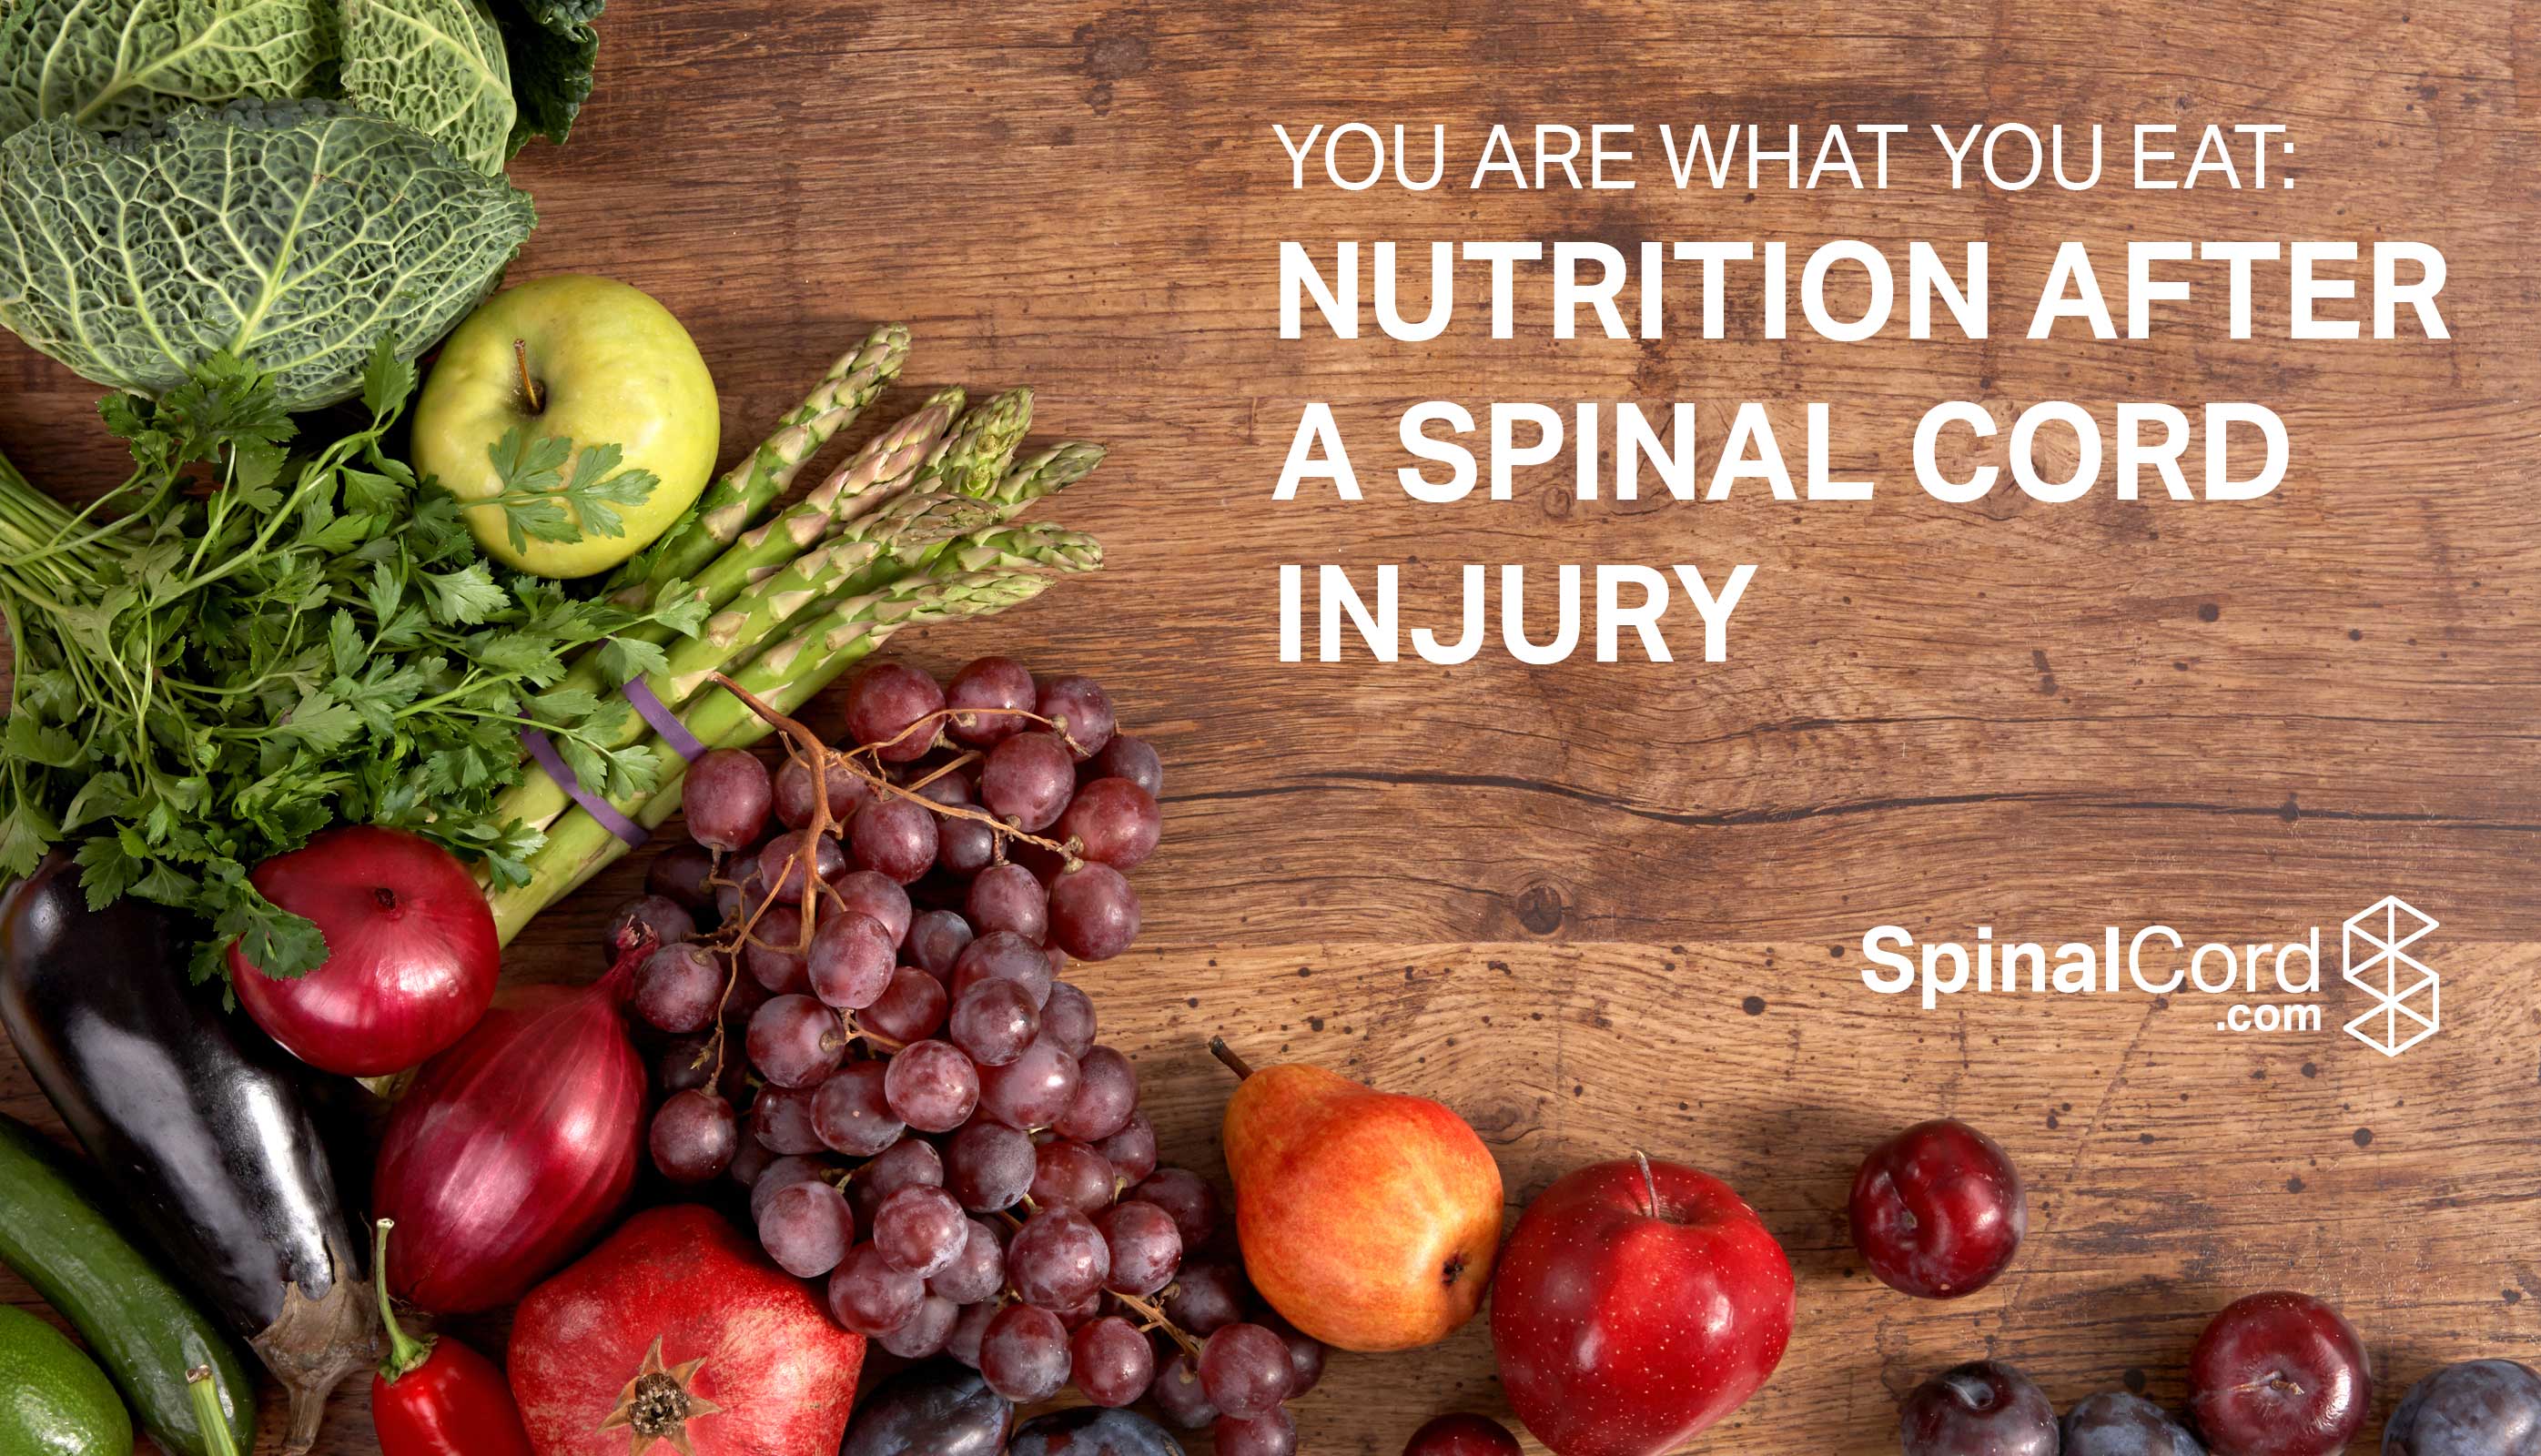 nutrition-after-a-spinal-cord-injury-wb